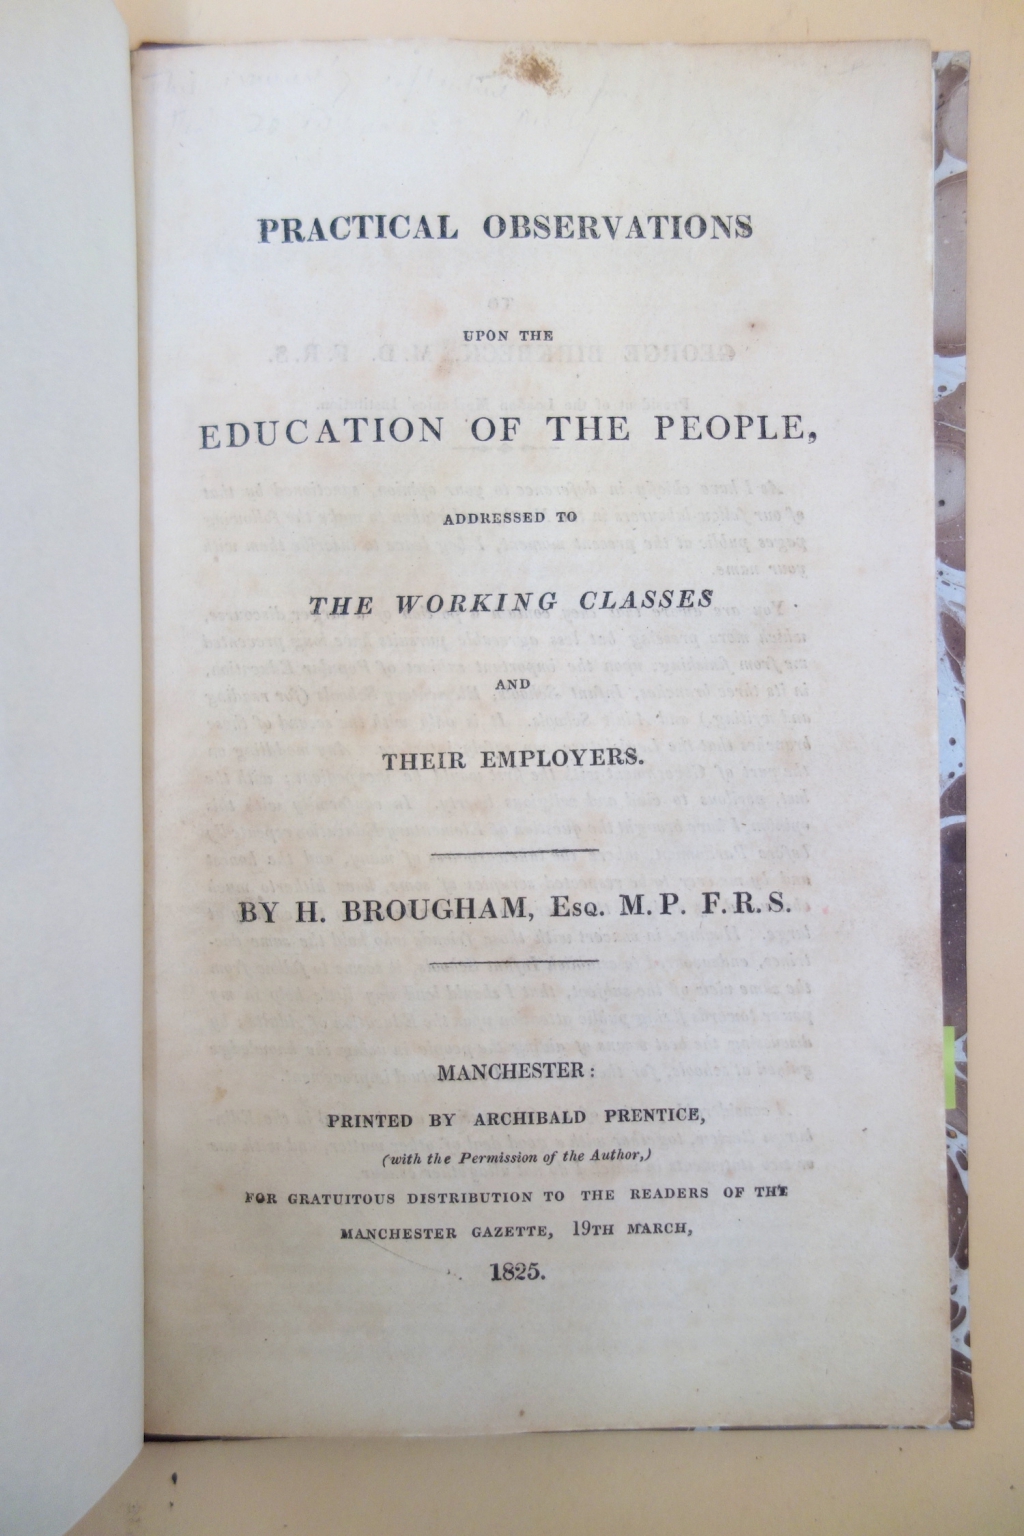 A Manchester reprint of Brougham's speech, the first edition of which was printed in London. Note that this pamphlet was distributed gratuitously by a newspaper publisher.